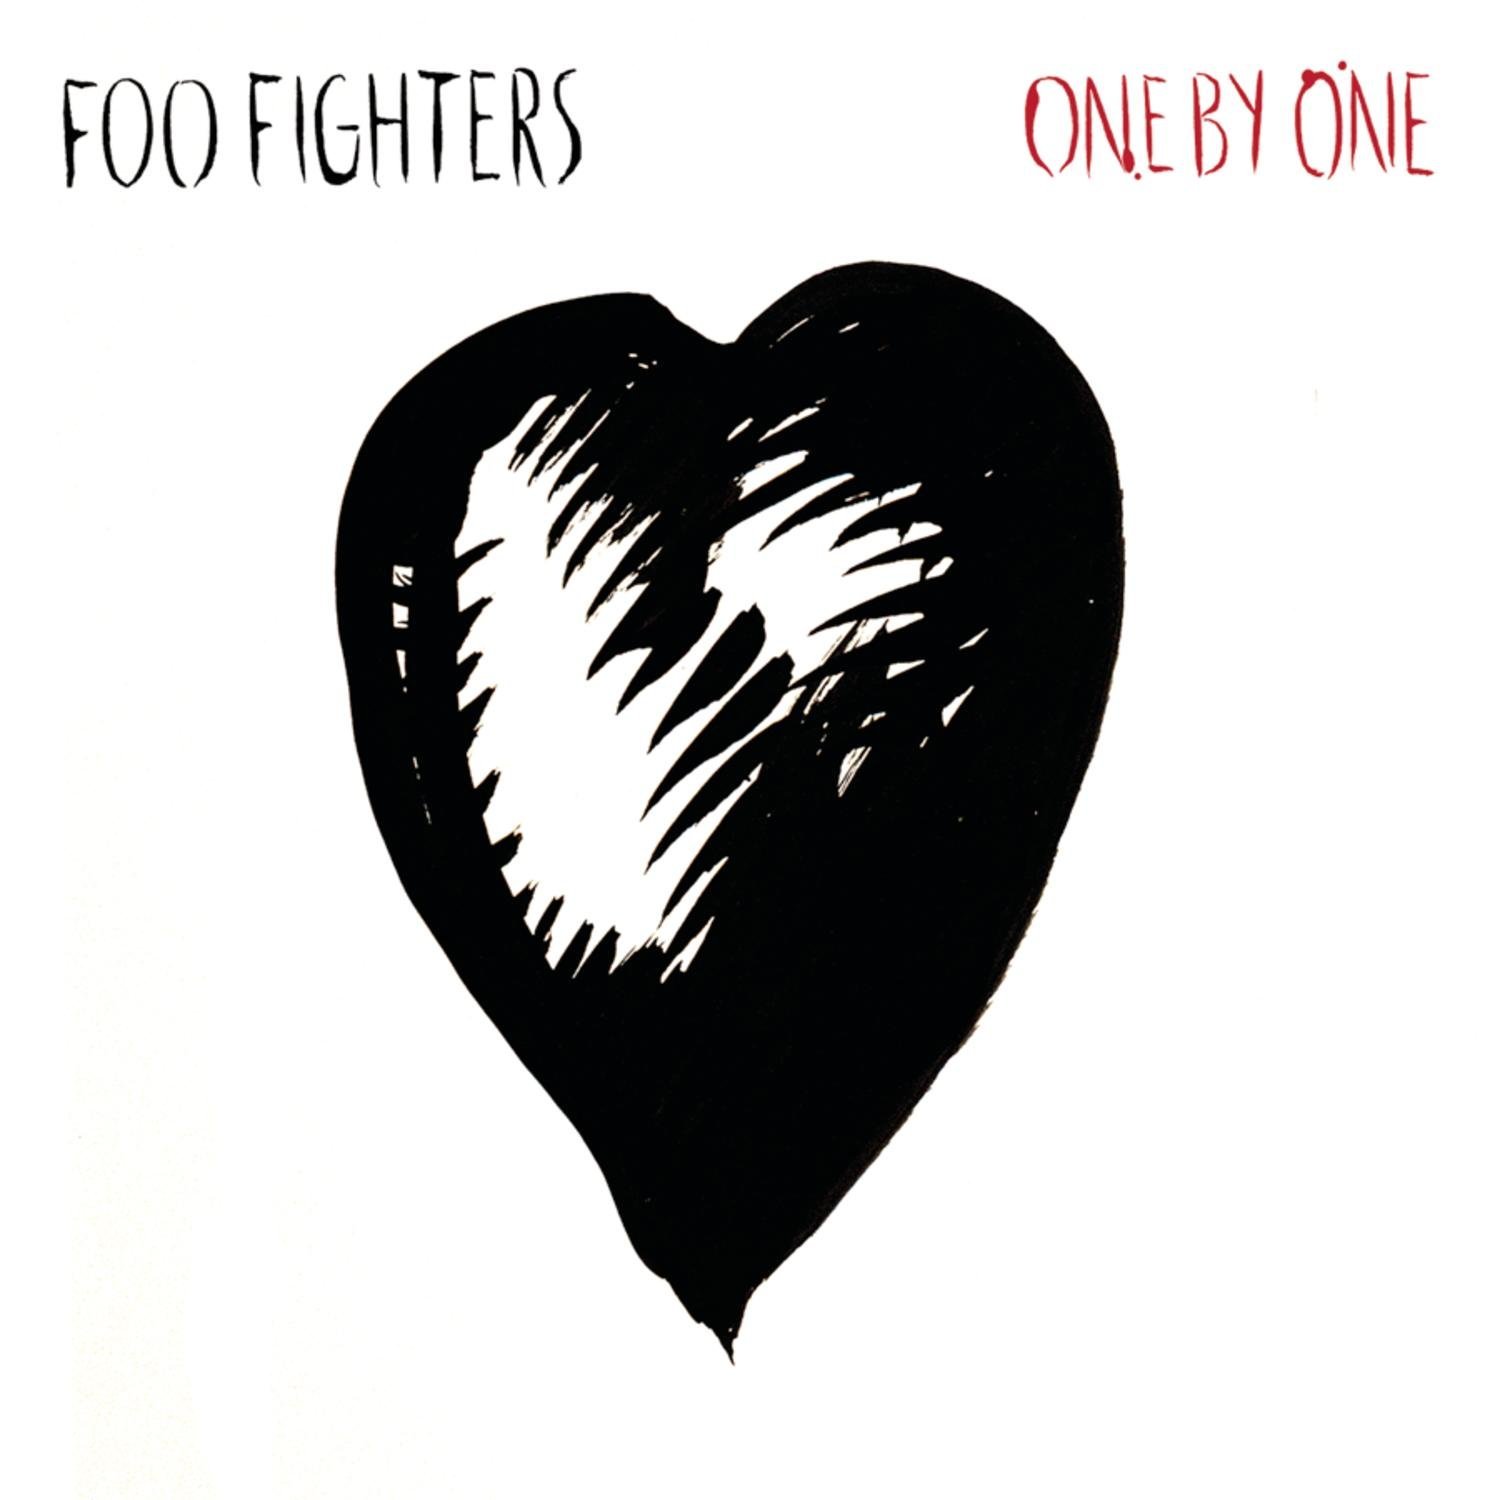 CD Foo Fighters - One by one